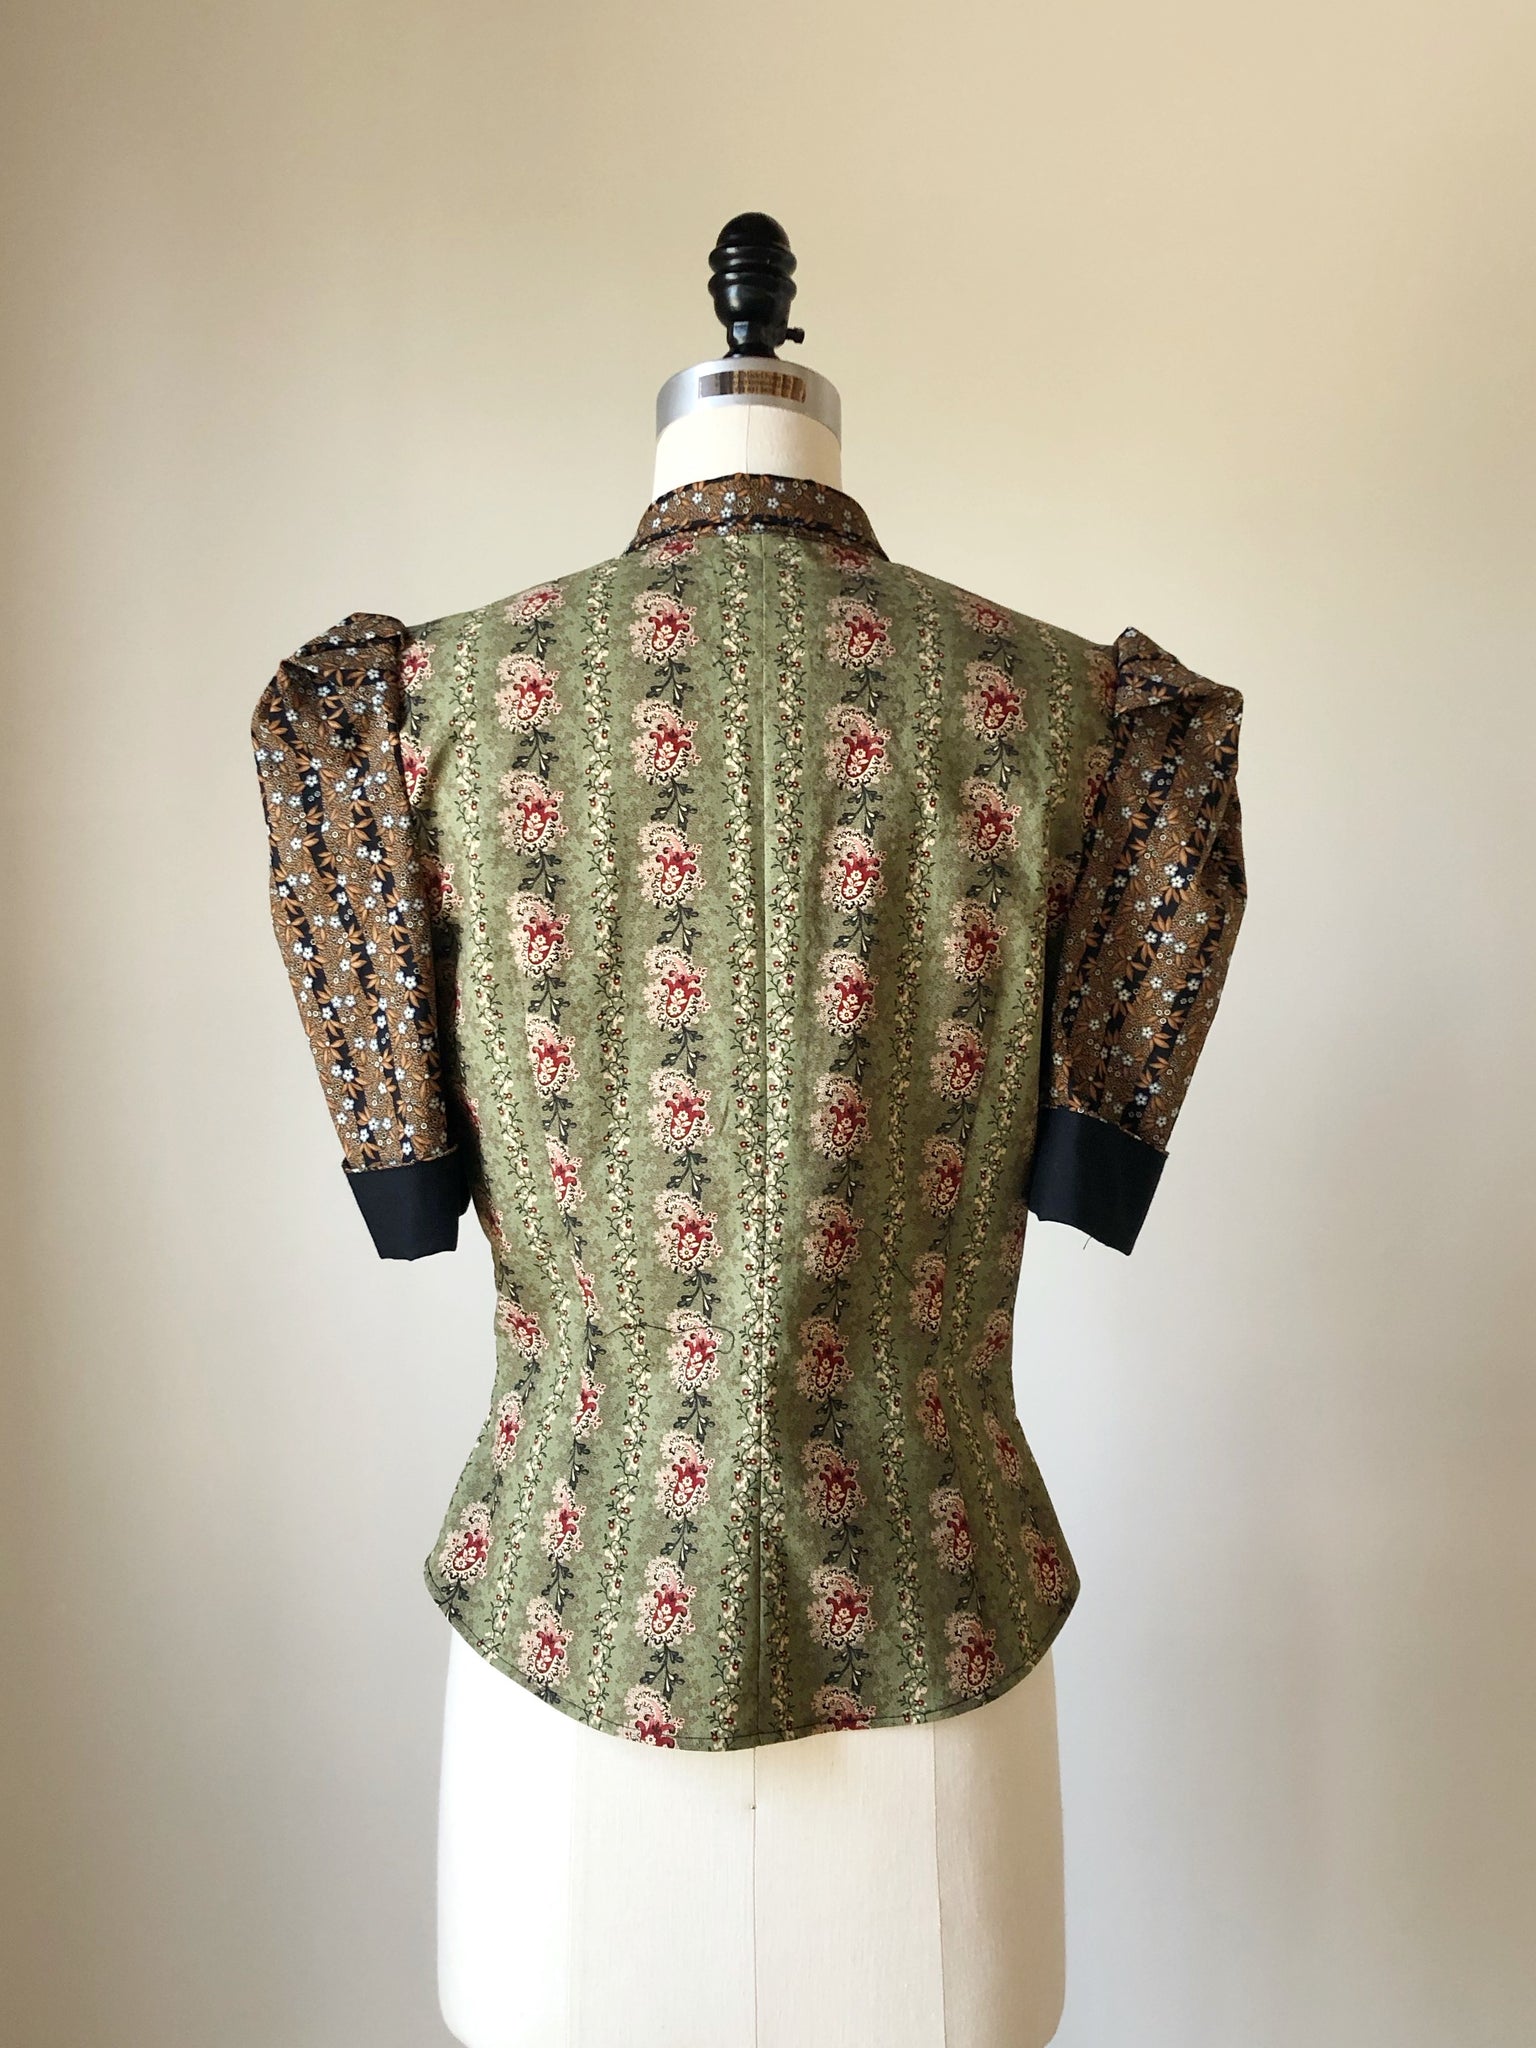 Lillian work shirt in 19th century reproduction prints #4